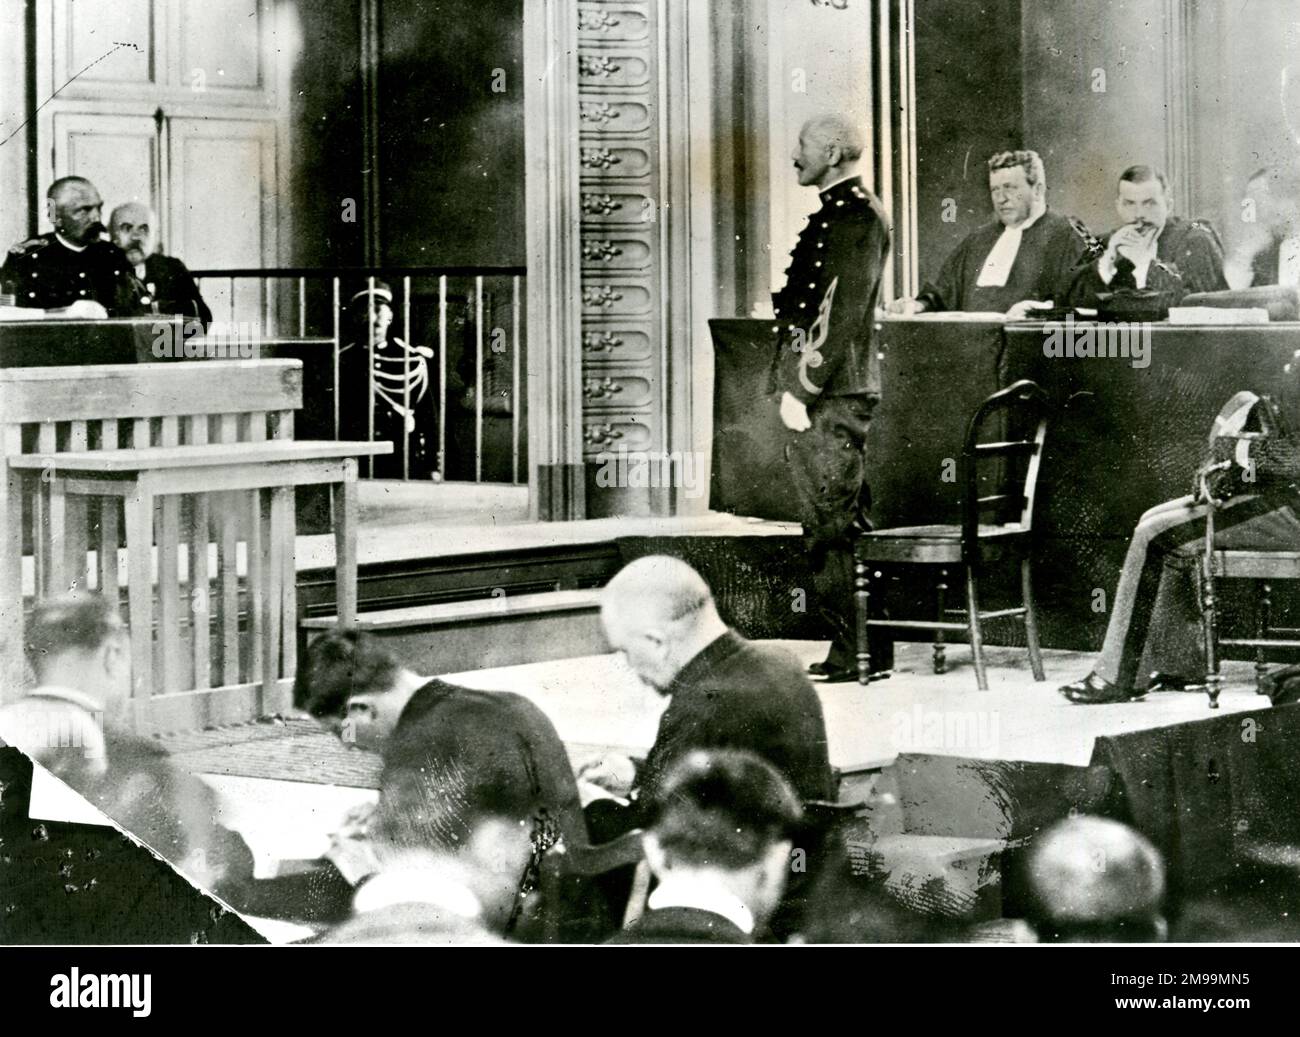 Captain Alfred Dreyfus at his second trial (court martial) at Rennes, France, 9 September 1899. His convictions were the result of a complex miscarriage of justice combined with antisemitism. He was first unjustly convicted of treason in 1894, convicted again in 1899, and it was only in 1906 that his innocence was officially established. Stock Photo